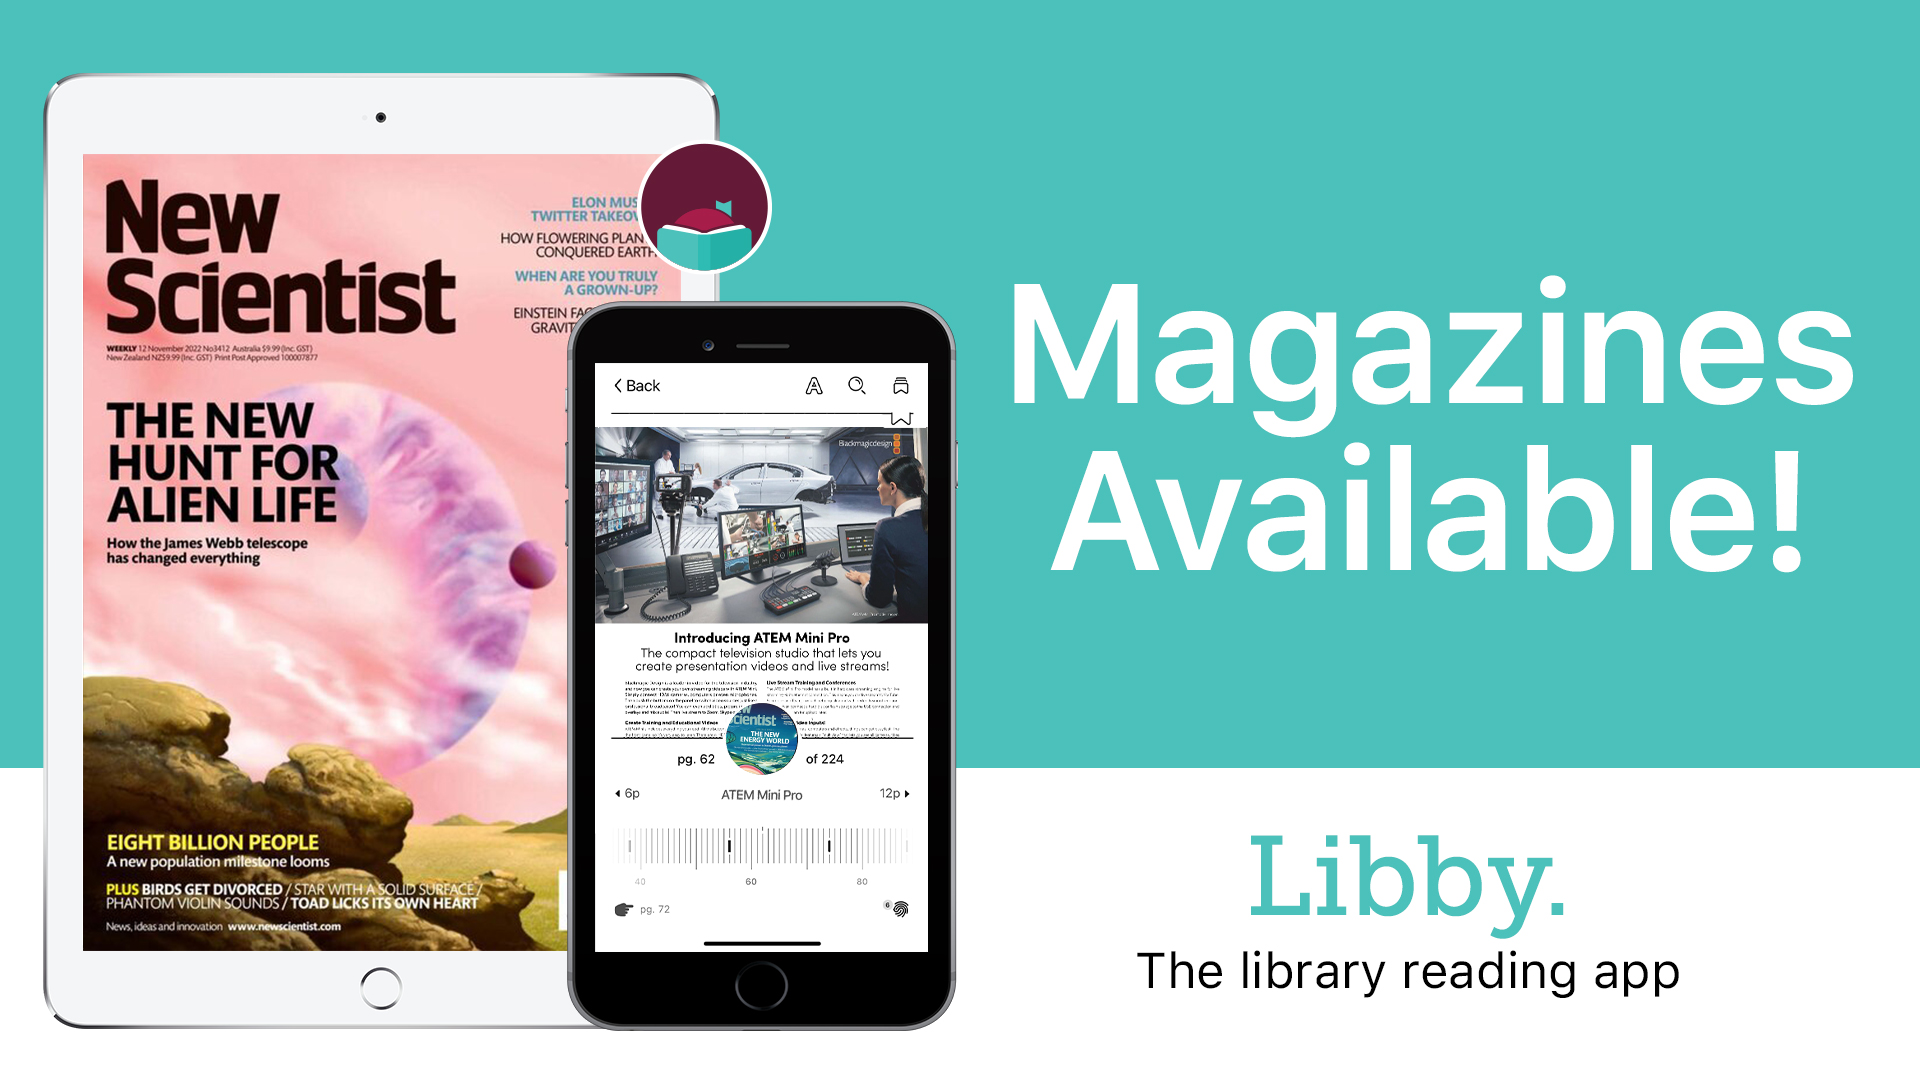 The words "Magazines availble!" and Libby are superimposed on a background with a magazine cover and phone with the Libby app open. 